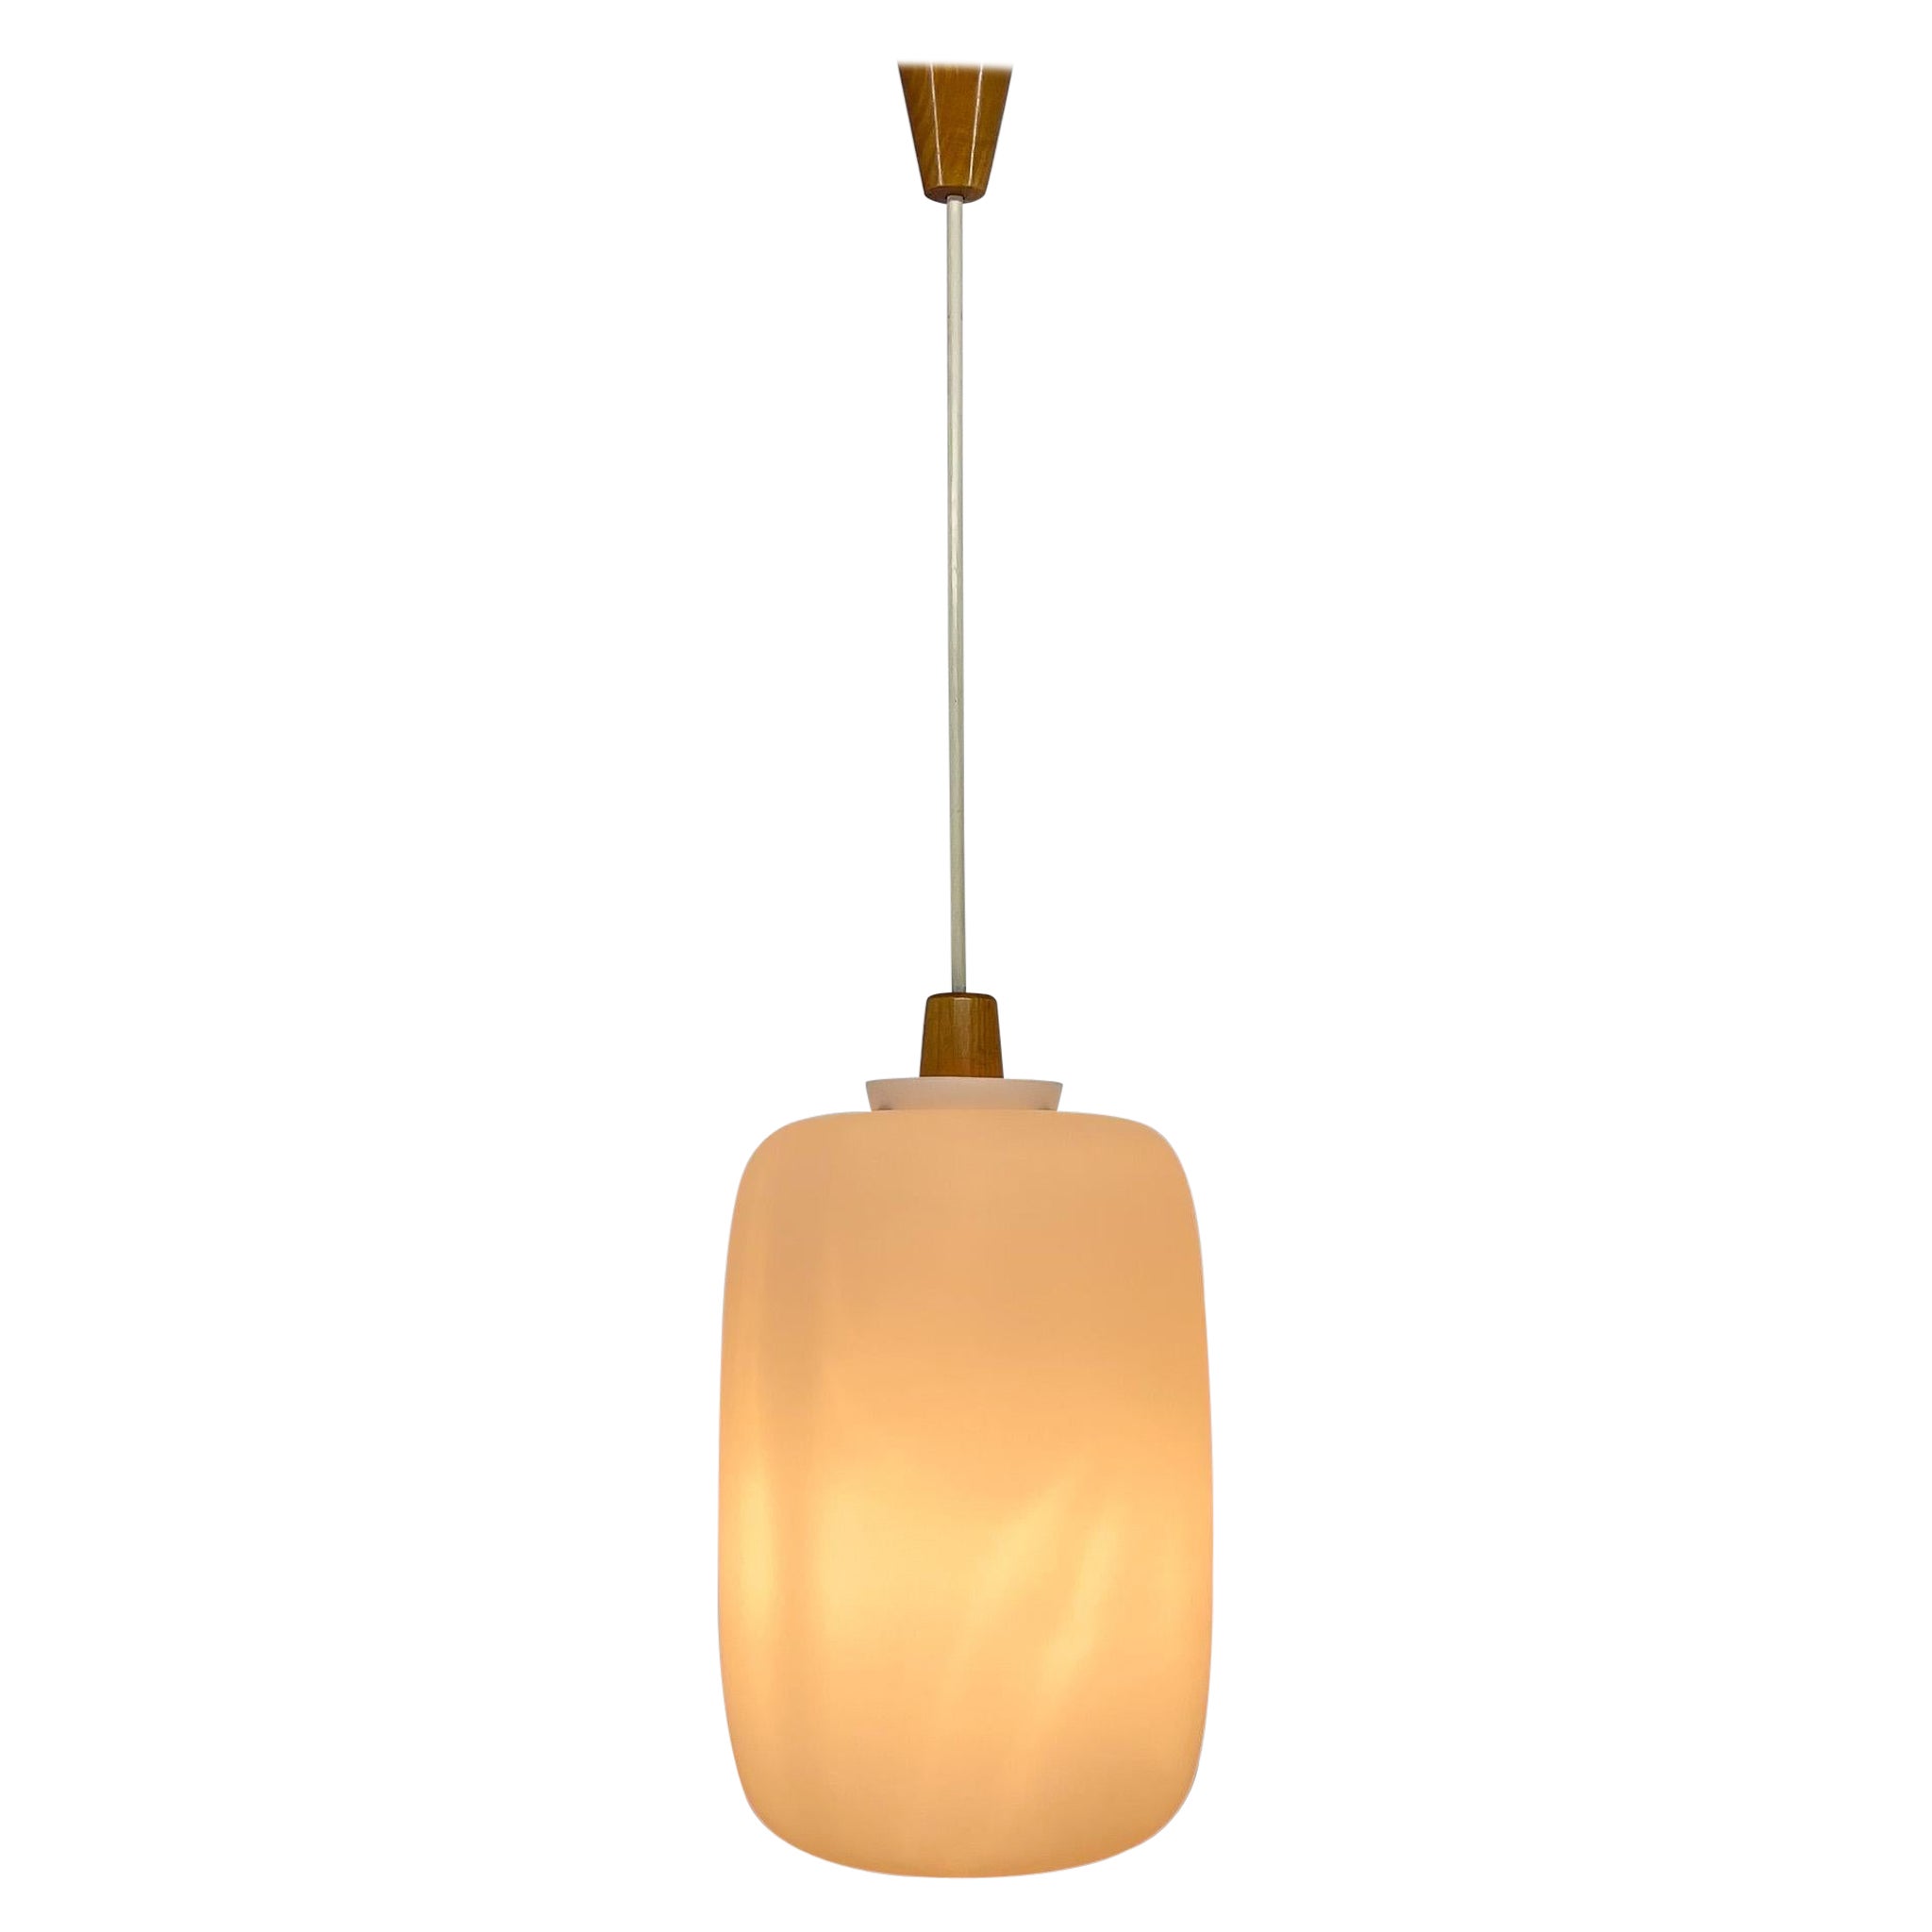 1960s Wood and Glass Midcentury Pendant Light by ULUV, Czechoslovakia For Sale